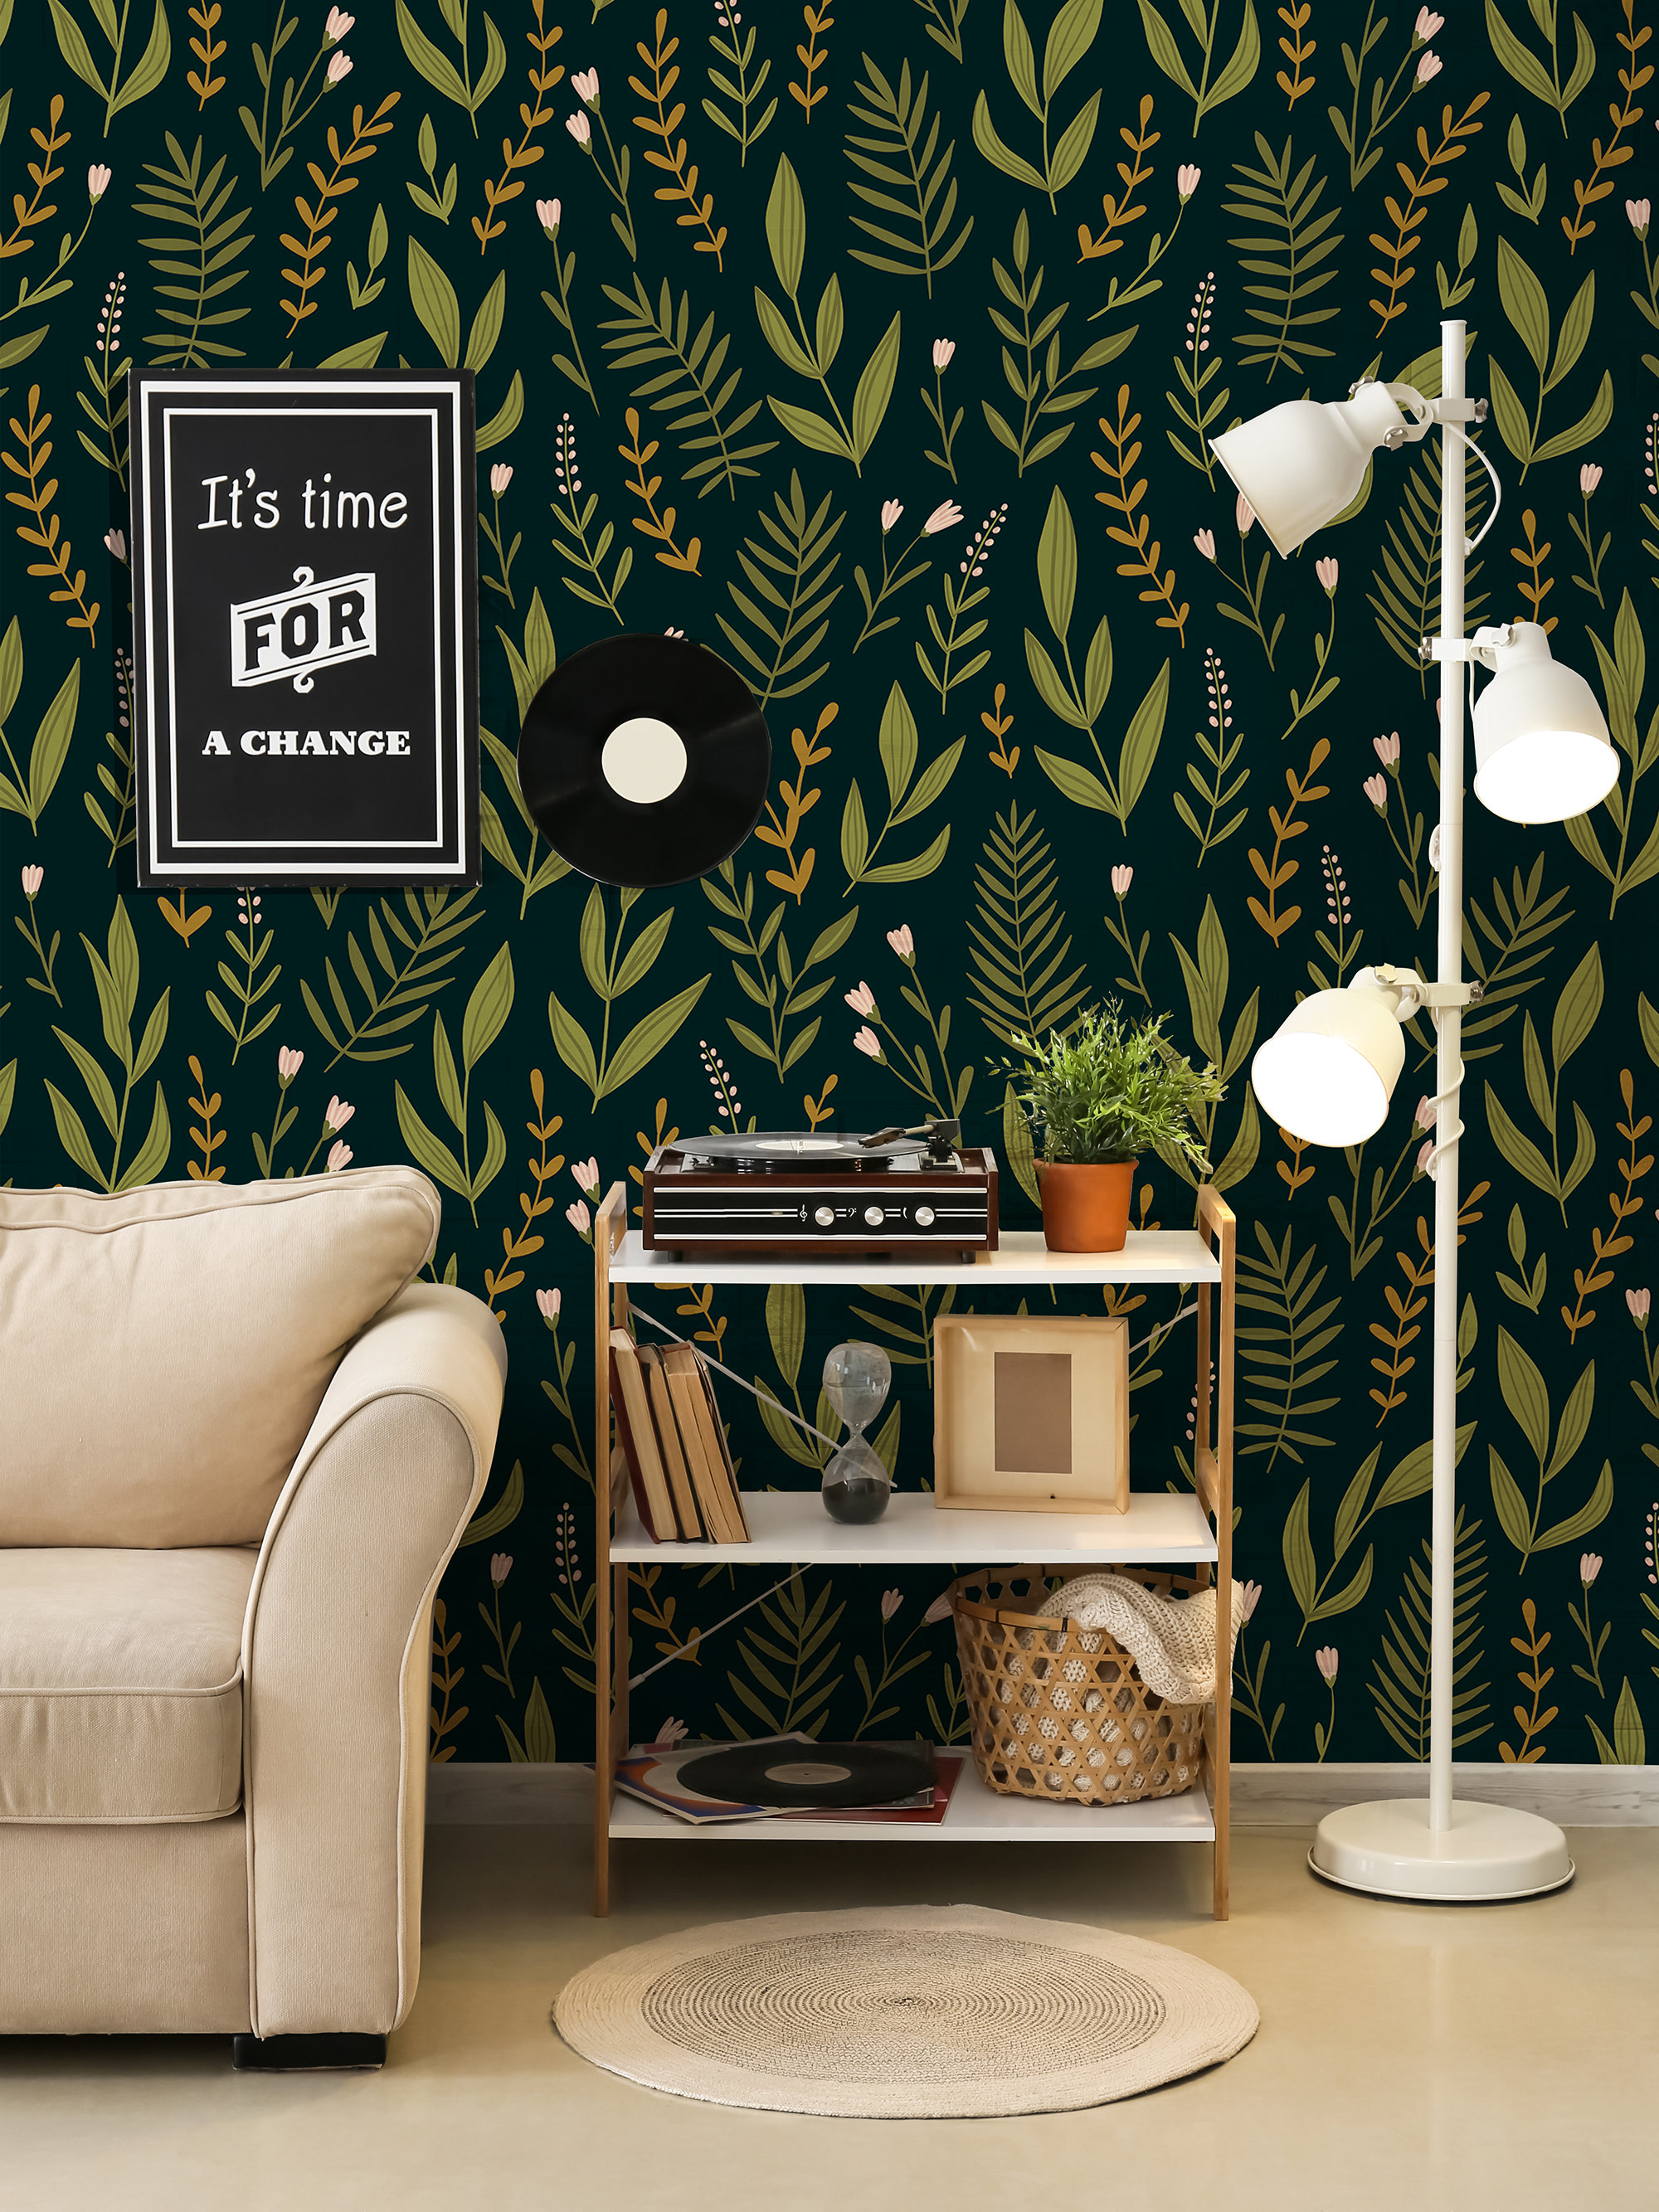 TOTAL HOME 12192 cm Green Wallpaper Peel and Stick Wallpaper Green Color  Decorative SelfAdhesive Waterproof Removable Wallpaper for Wall Covering  Furniture Cabinet Size  12 x 48 inch Self Adhesive Sticker Price